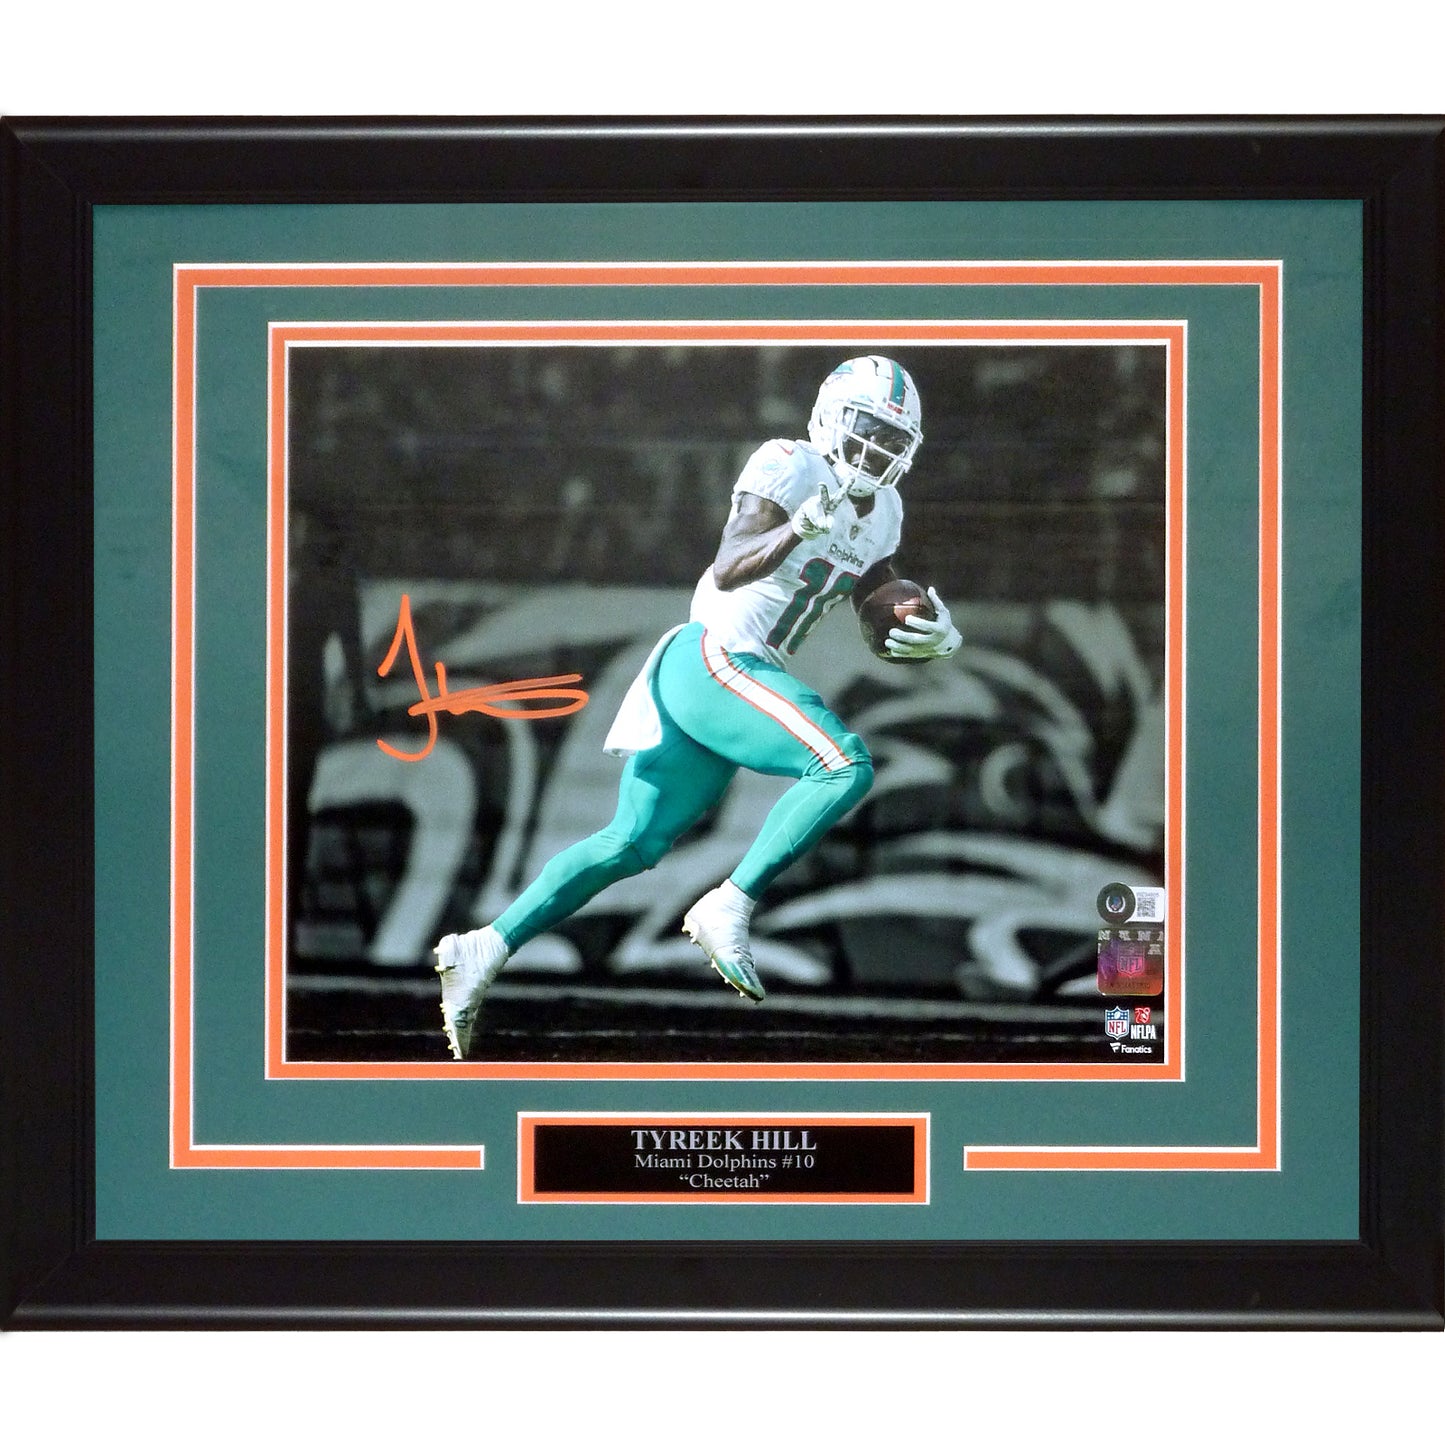 Tyreek Hill Autographed Miami Dolphins (Spotlight) Deluxe 11x14 Photo – Beckett